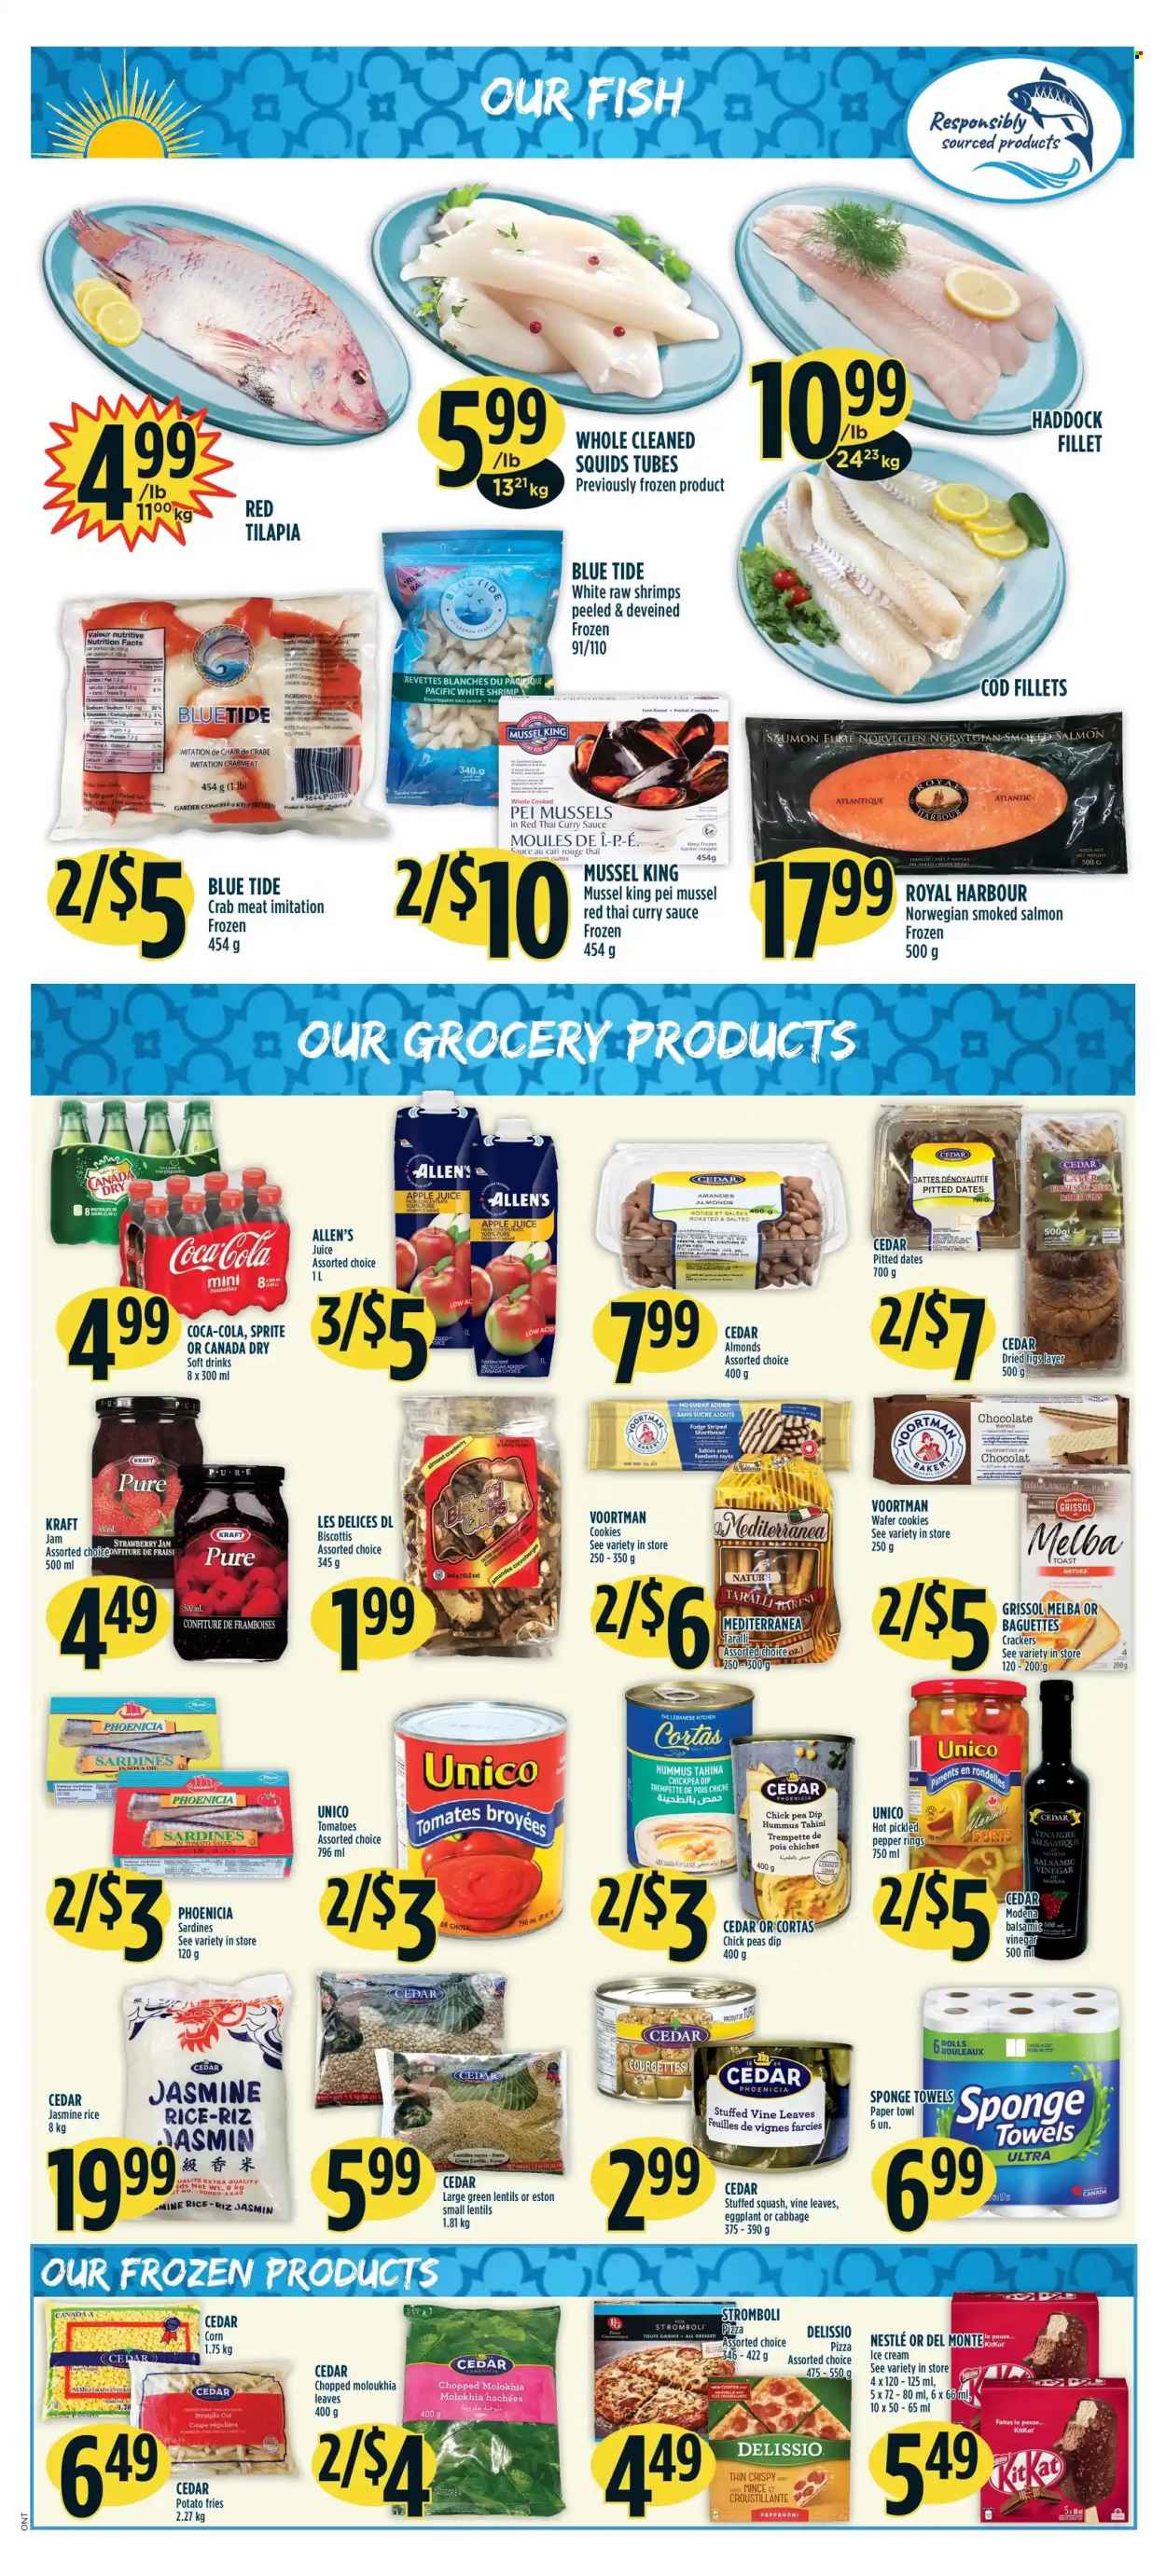 thumbnail - Adonis Flyer - June 30, 2022 - July 06, 2022 - Sales products - corn, figs, cod, crab meat, mussels, salmon, sardines, smoked salmon, tilapia, haddock, crab, fish, shrimps, pizza, Kraft®, pepperoni, hummus, potato fries, cookies, fudge, wafers, KitKat, crackers, lentils, strawberry jam, jasmine rice, pepper, tahini, curry sauce, balsamic vinegar, soya oil, vinegar, oil, fruit jam, almonds, dried fruit, dried dates, dried figs, apple juice, Canada Dry, Coca-Cola, Sprite, juice, soft drink, Tide, baguette, Nestlé. Page 3.